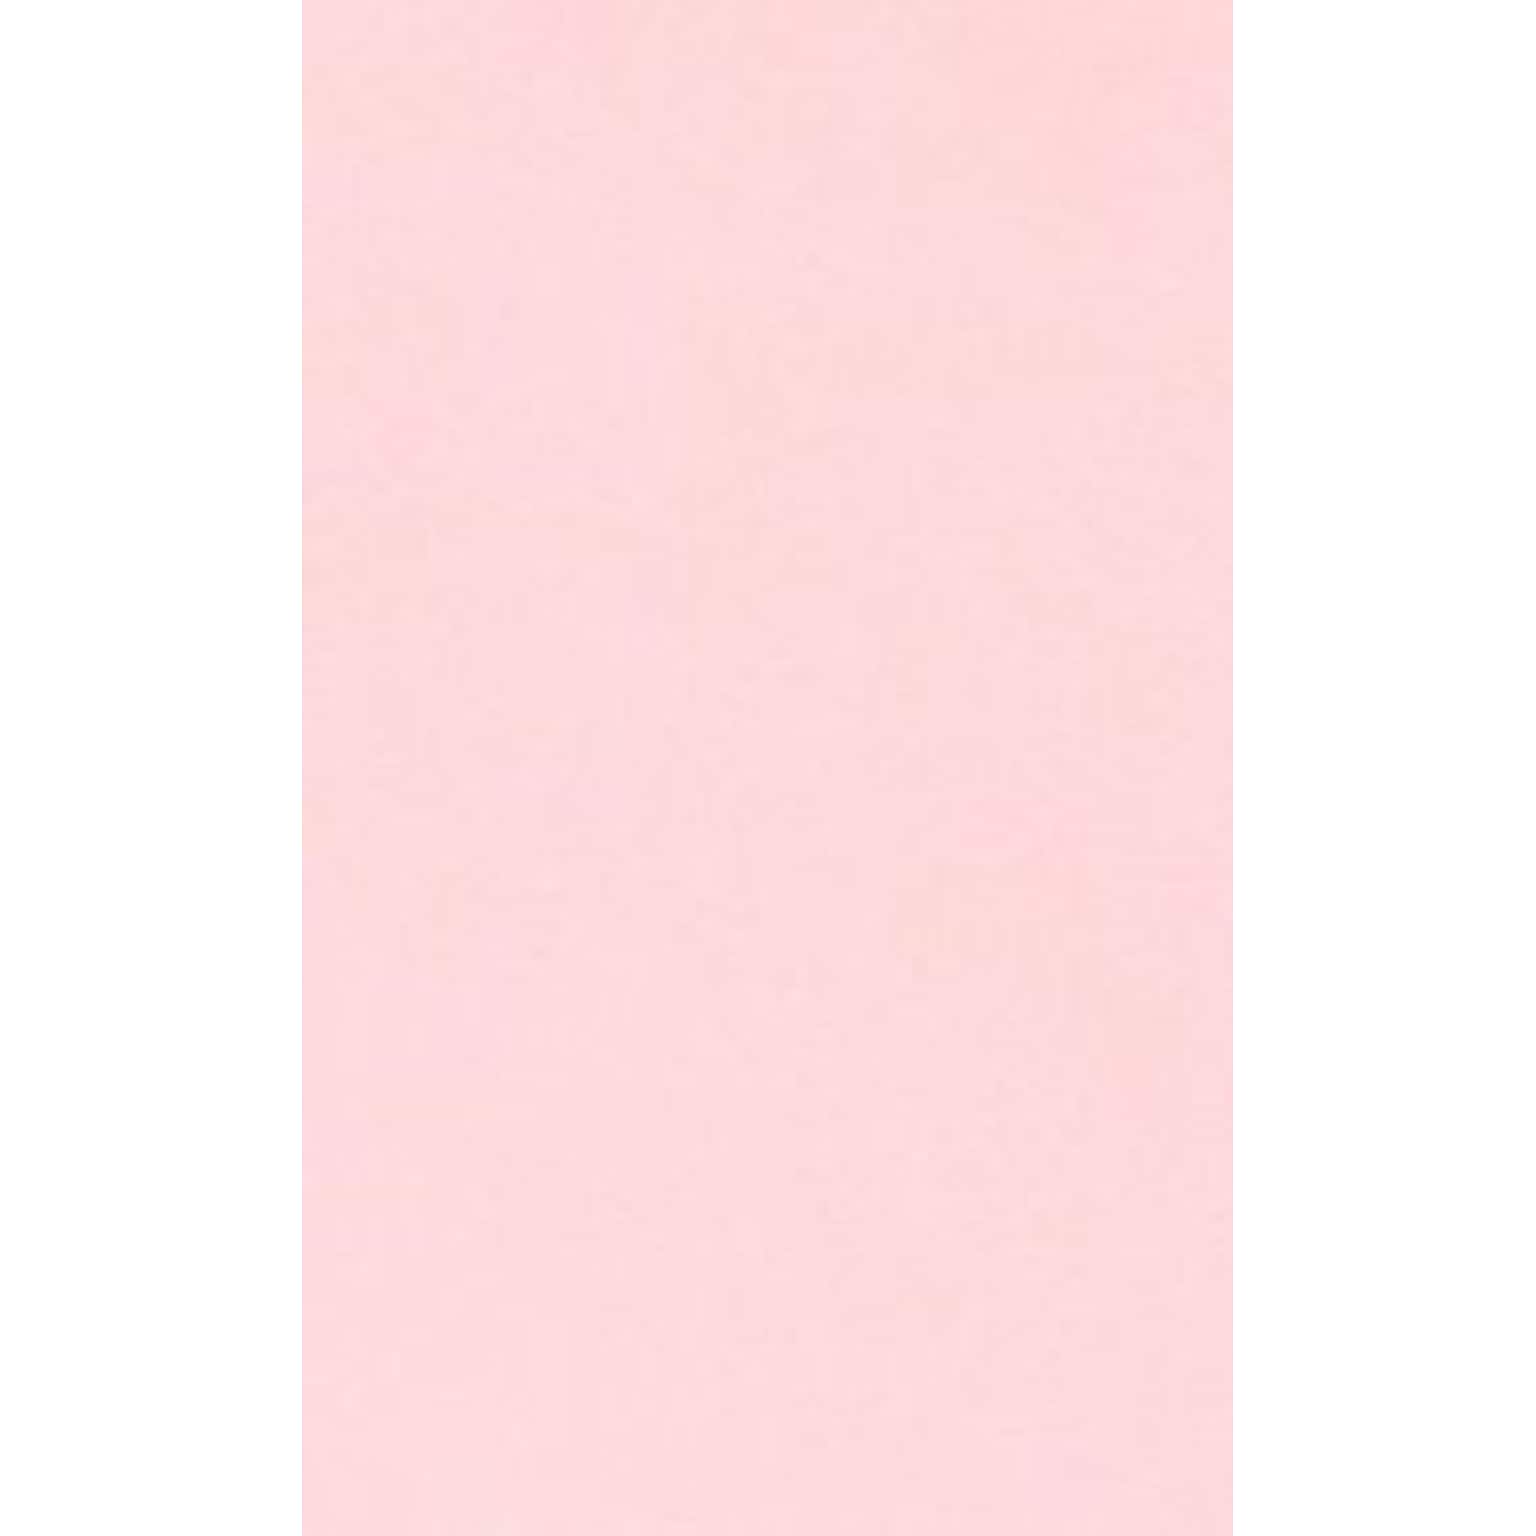 LUX Colored Paper, 32 lbs., 8.5 x 14, Candy Pink, 50 Sheets/Pack (81214-P-14-50)